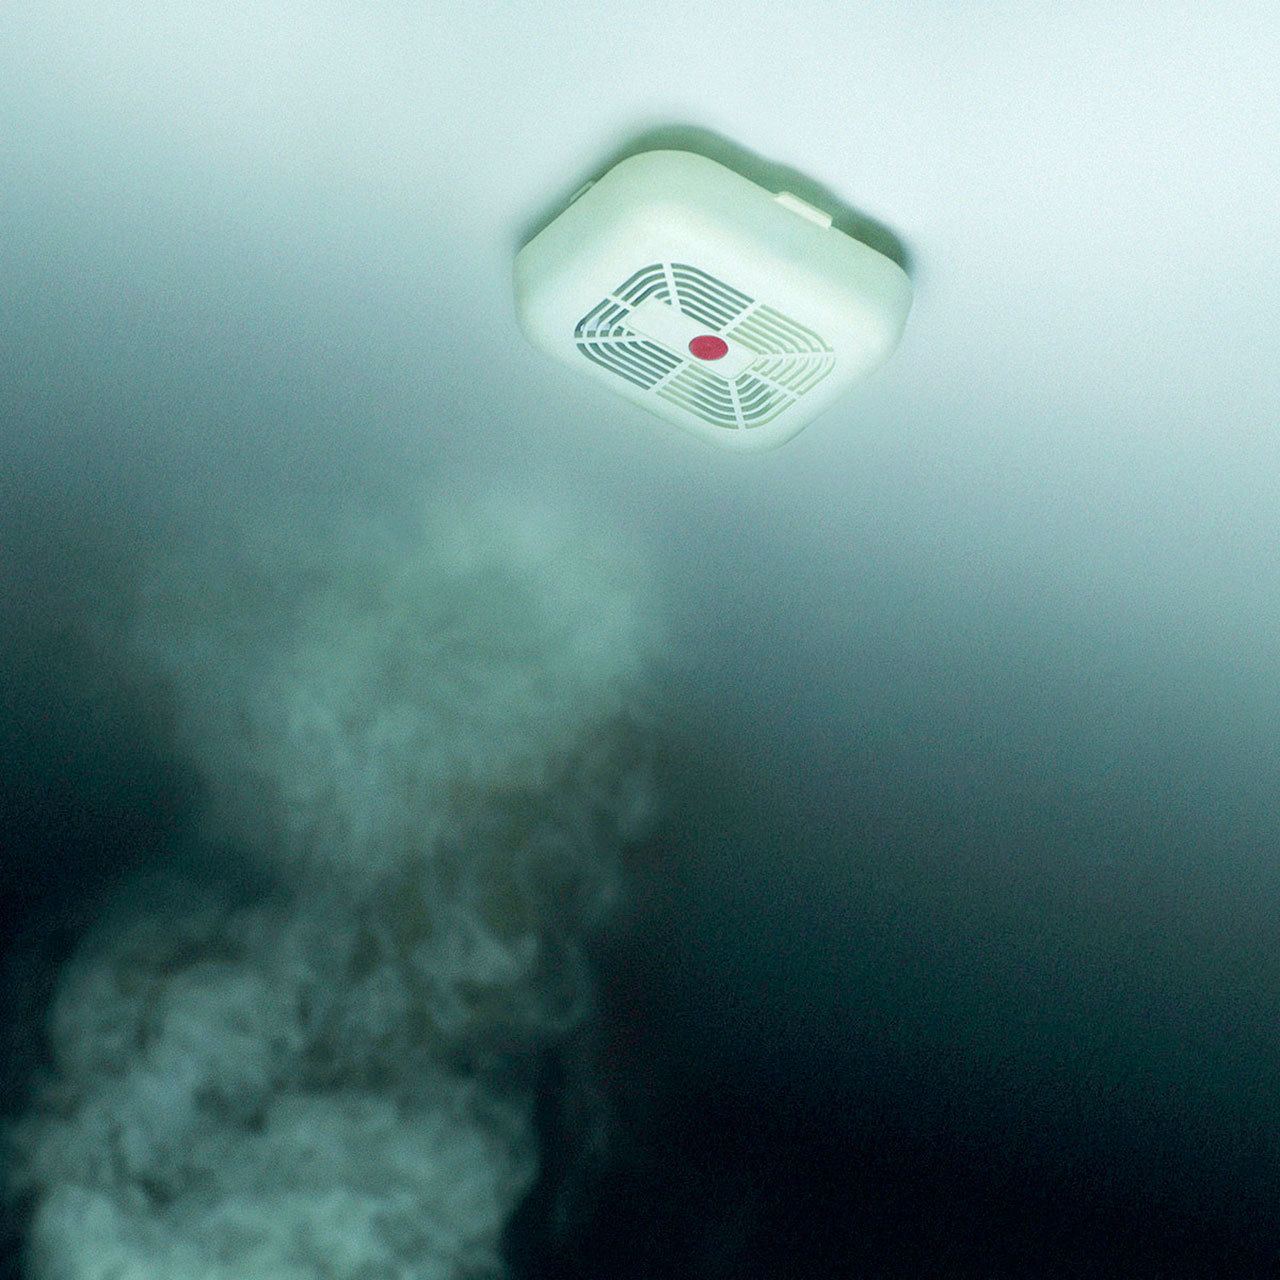 Be sure smoke alarms are working properly by testing them annually.